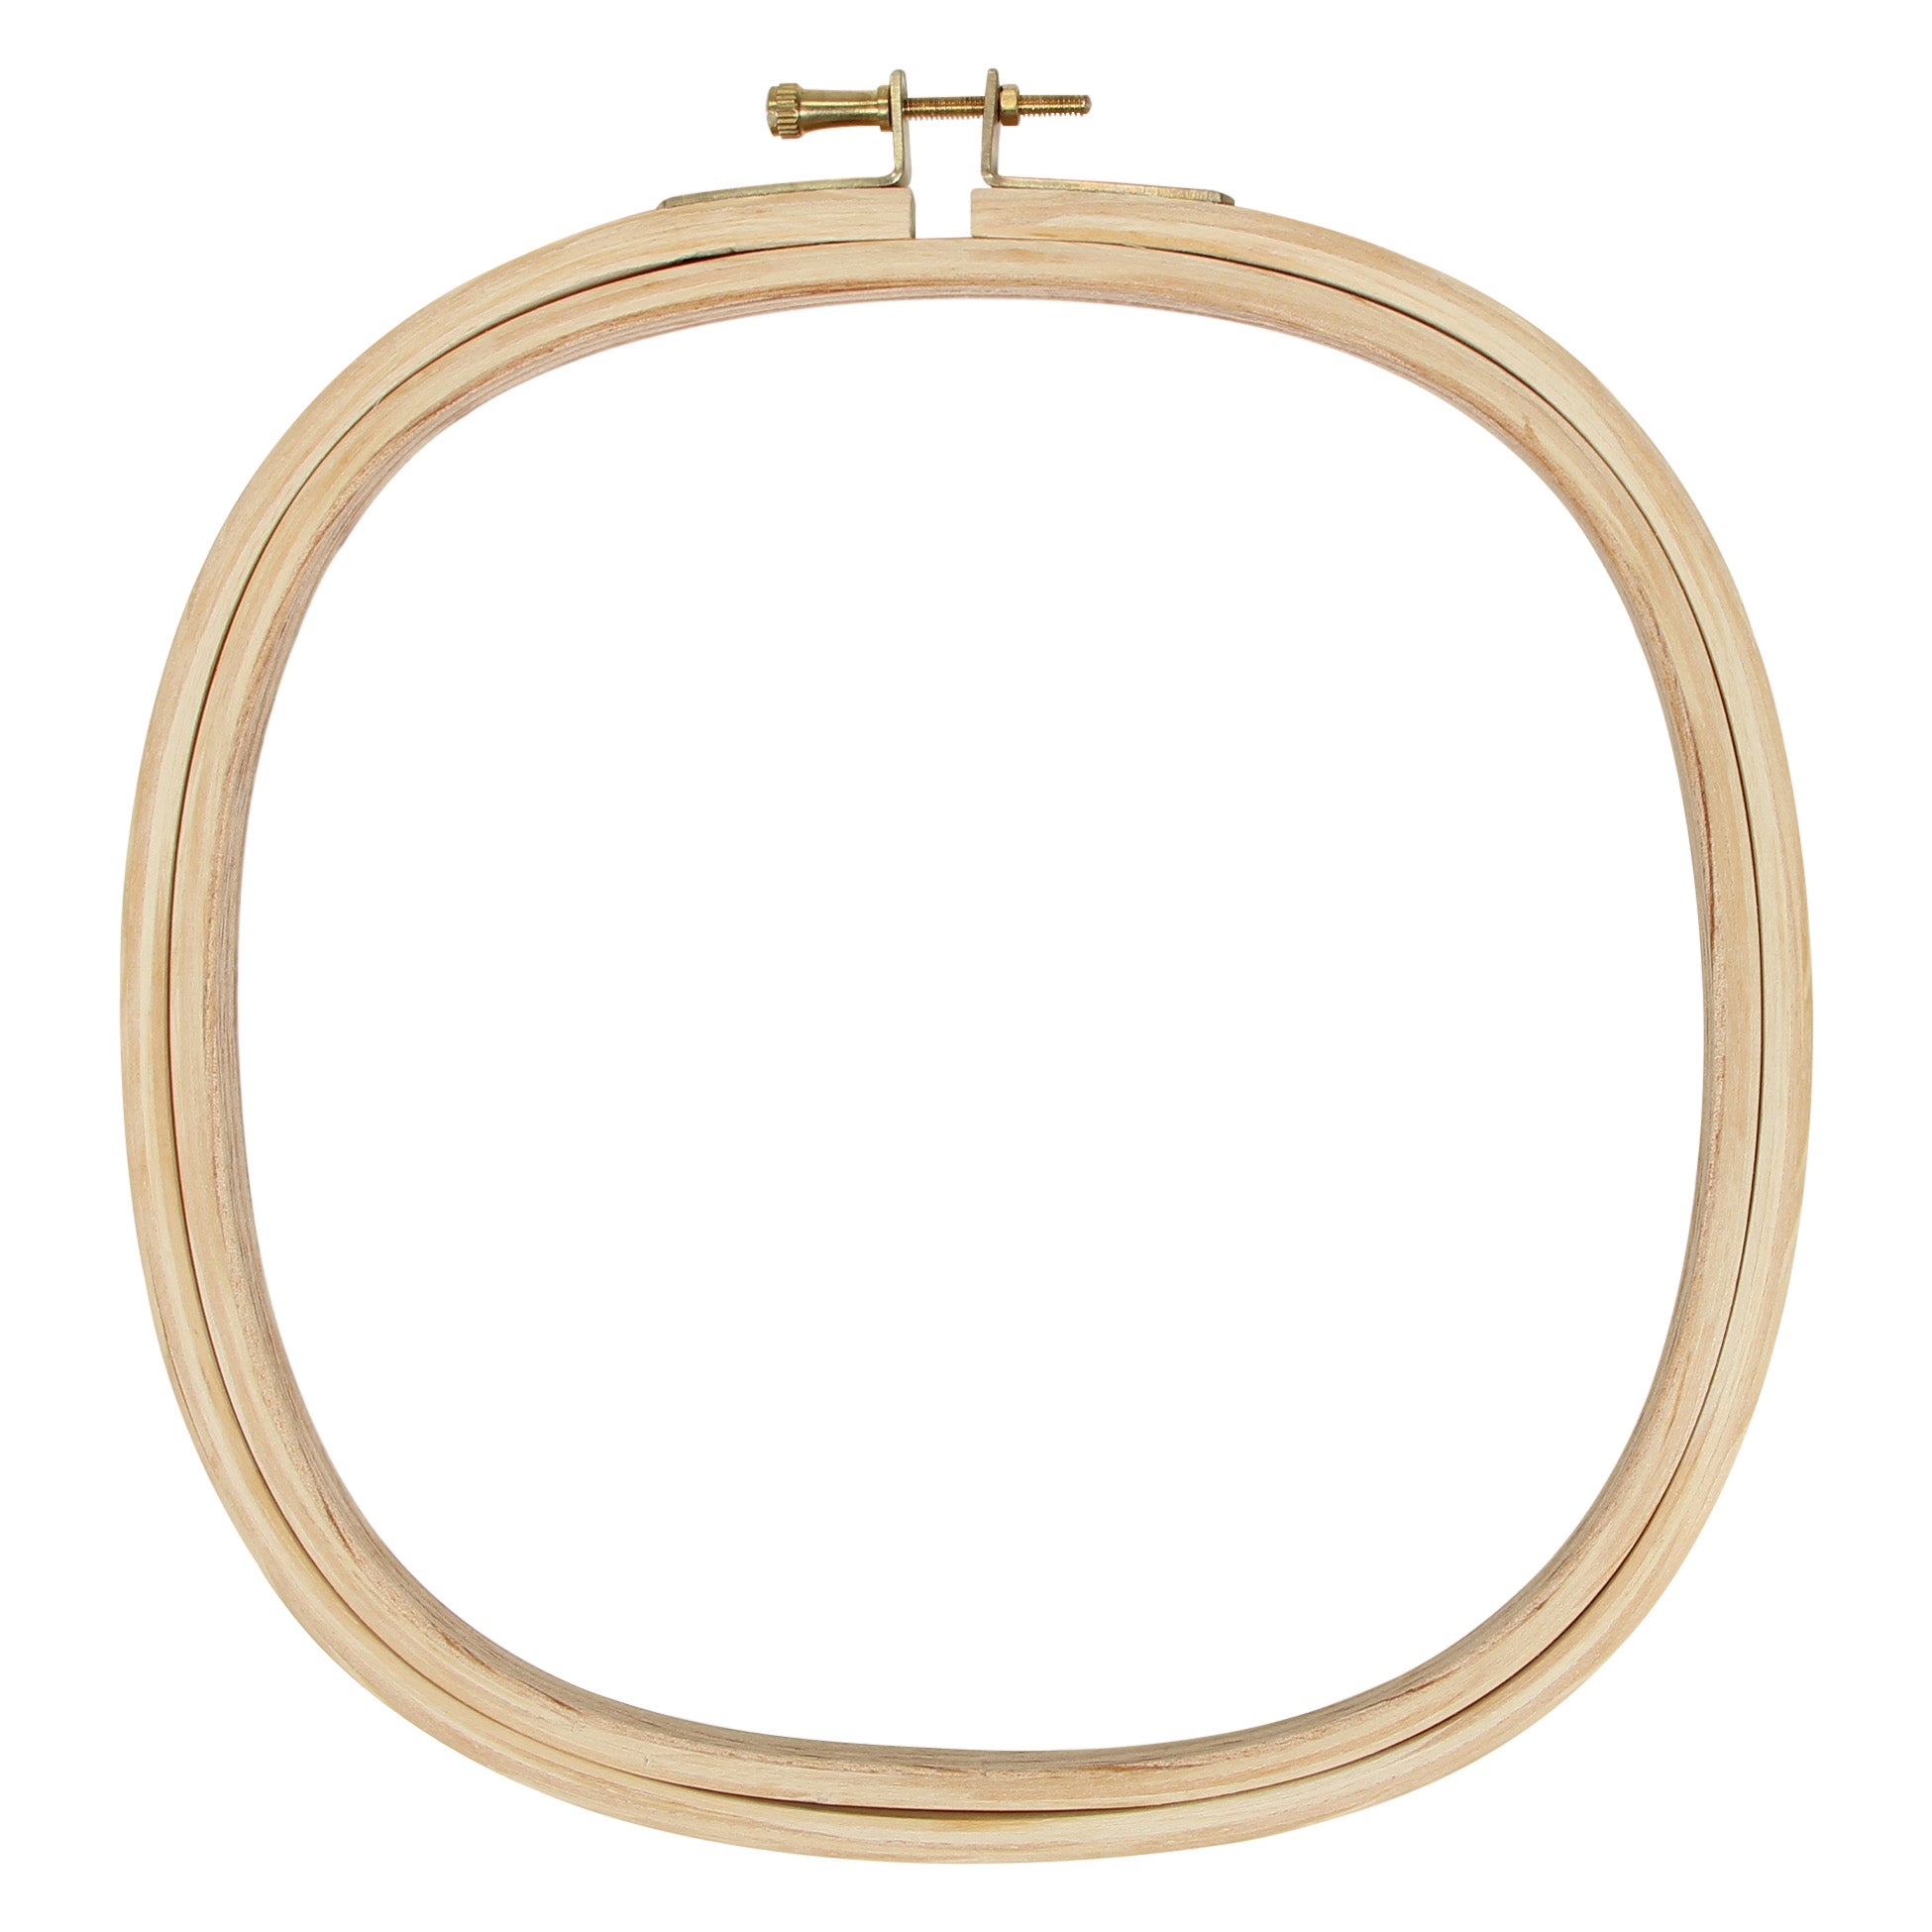 UNIQUE Embroidery Hoops, Square